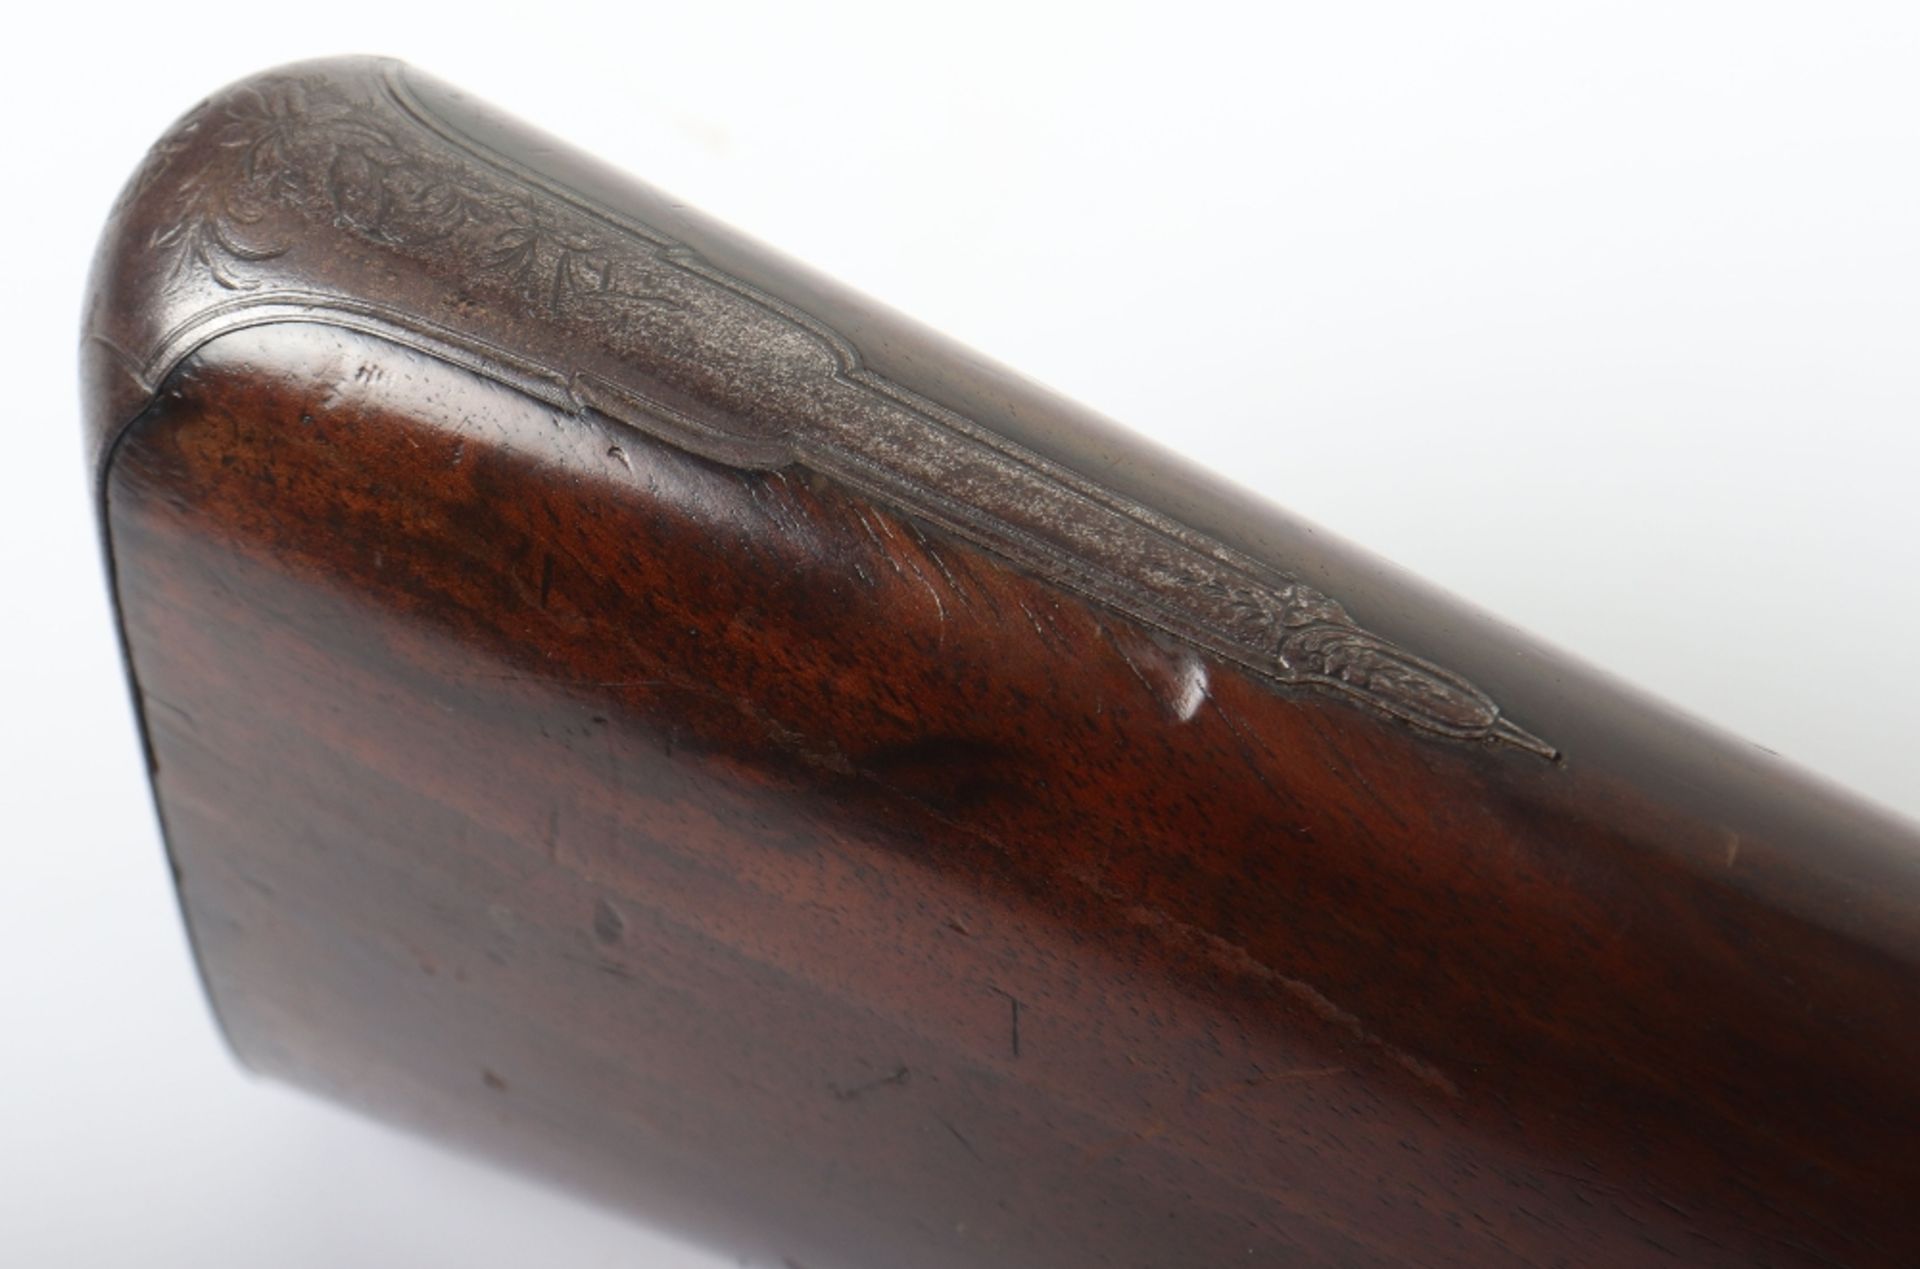 16-Bore Percussion Sporting Gun by D. Egg, Late 18th Century - Image 11 of 15